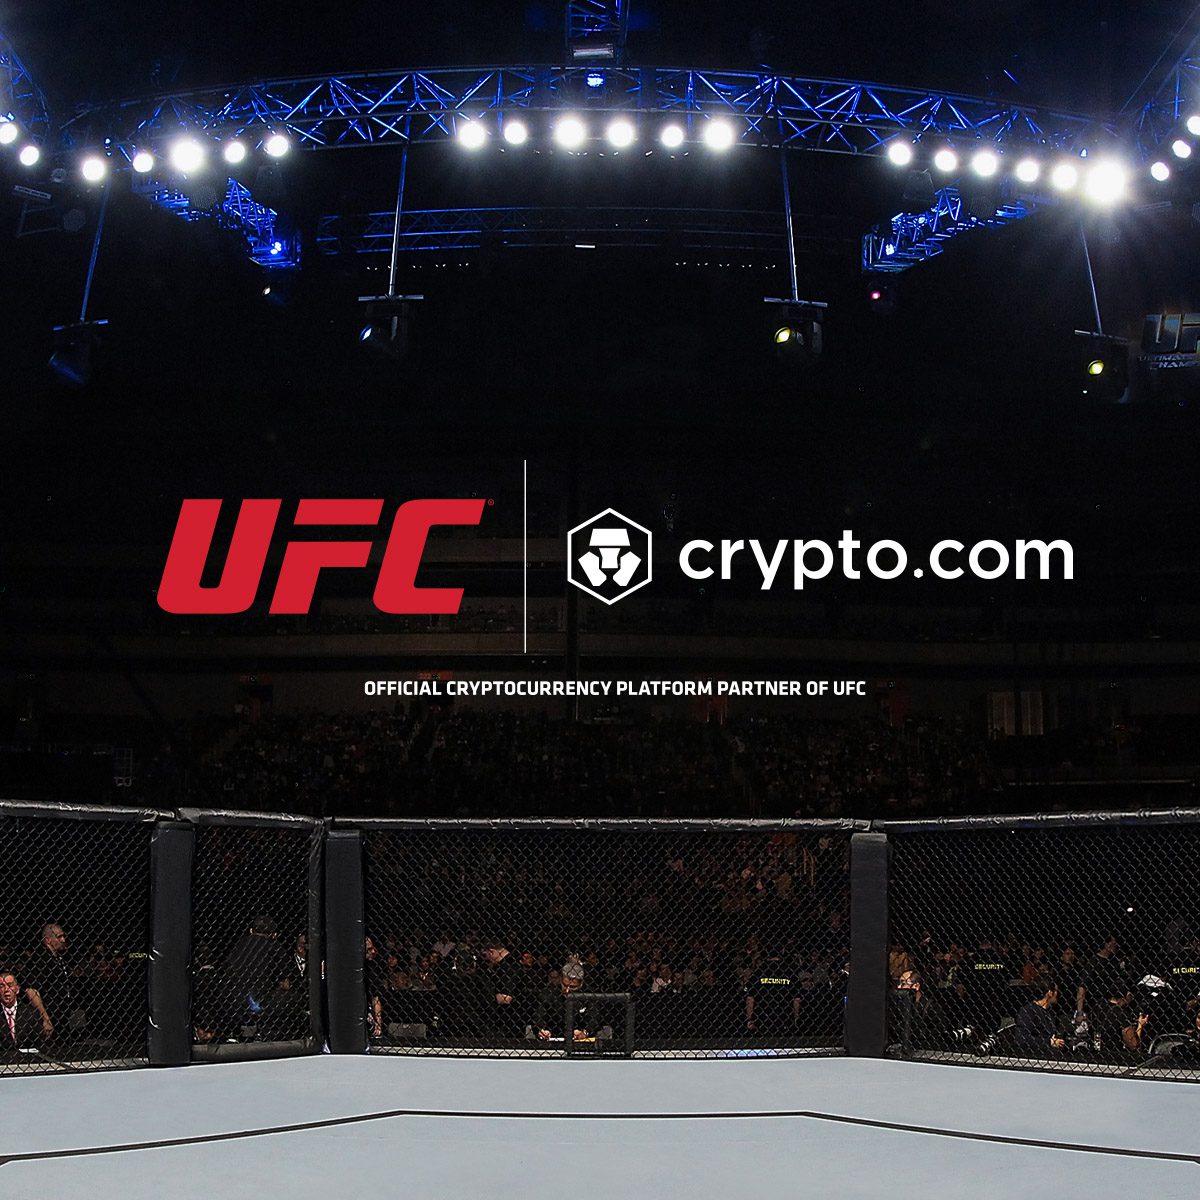 UFC and Crypto.com unveil new bonuses in Bitcoin for fighters - Micky